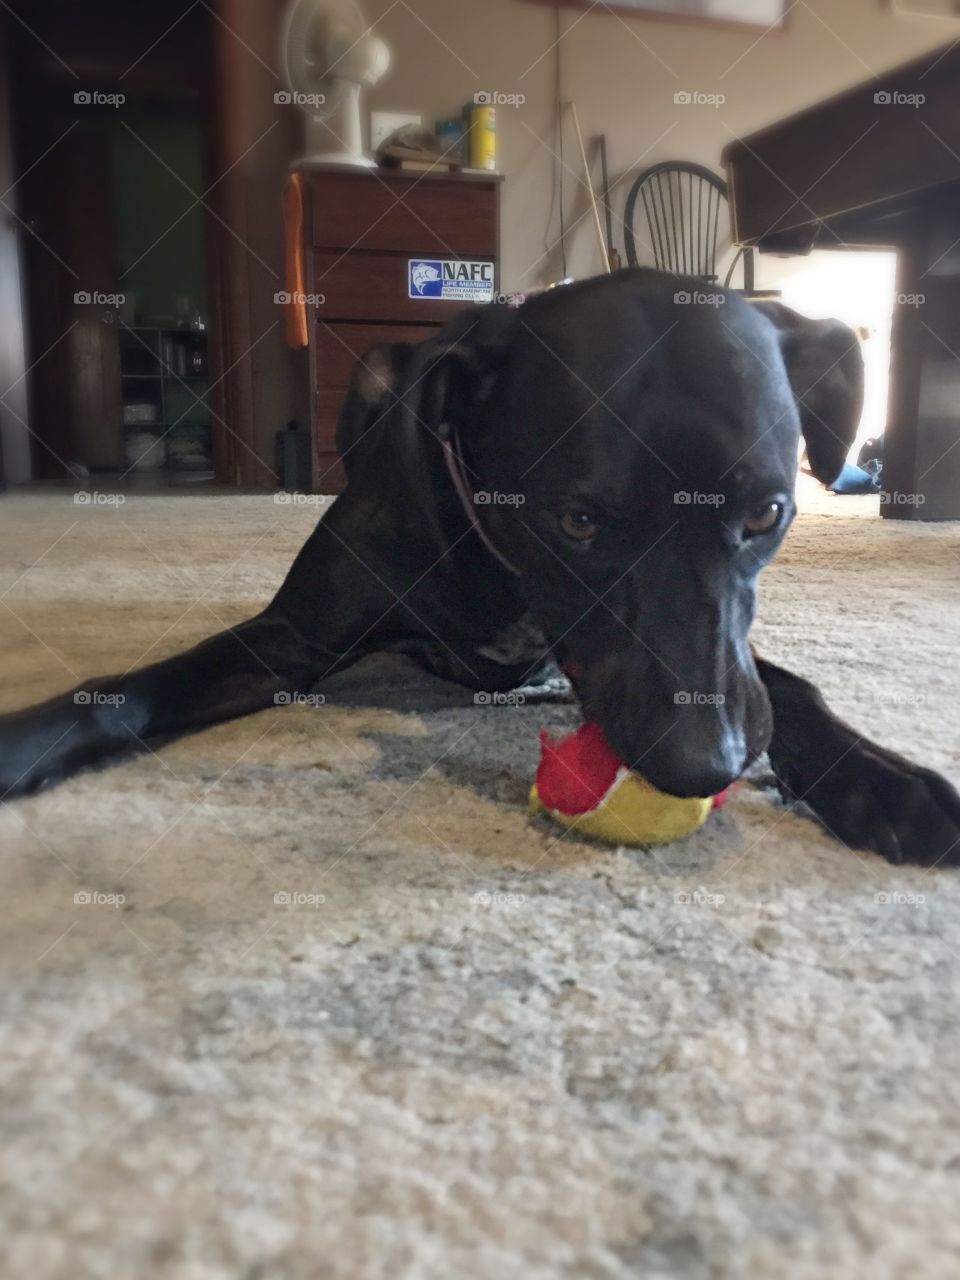 You can't have my ball.